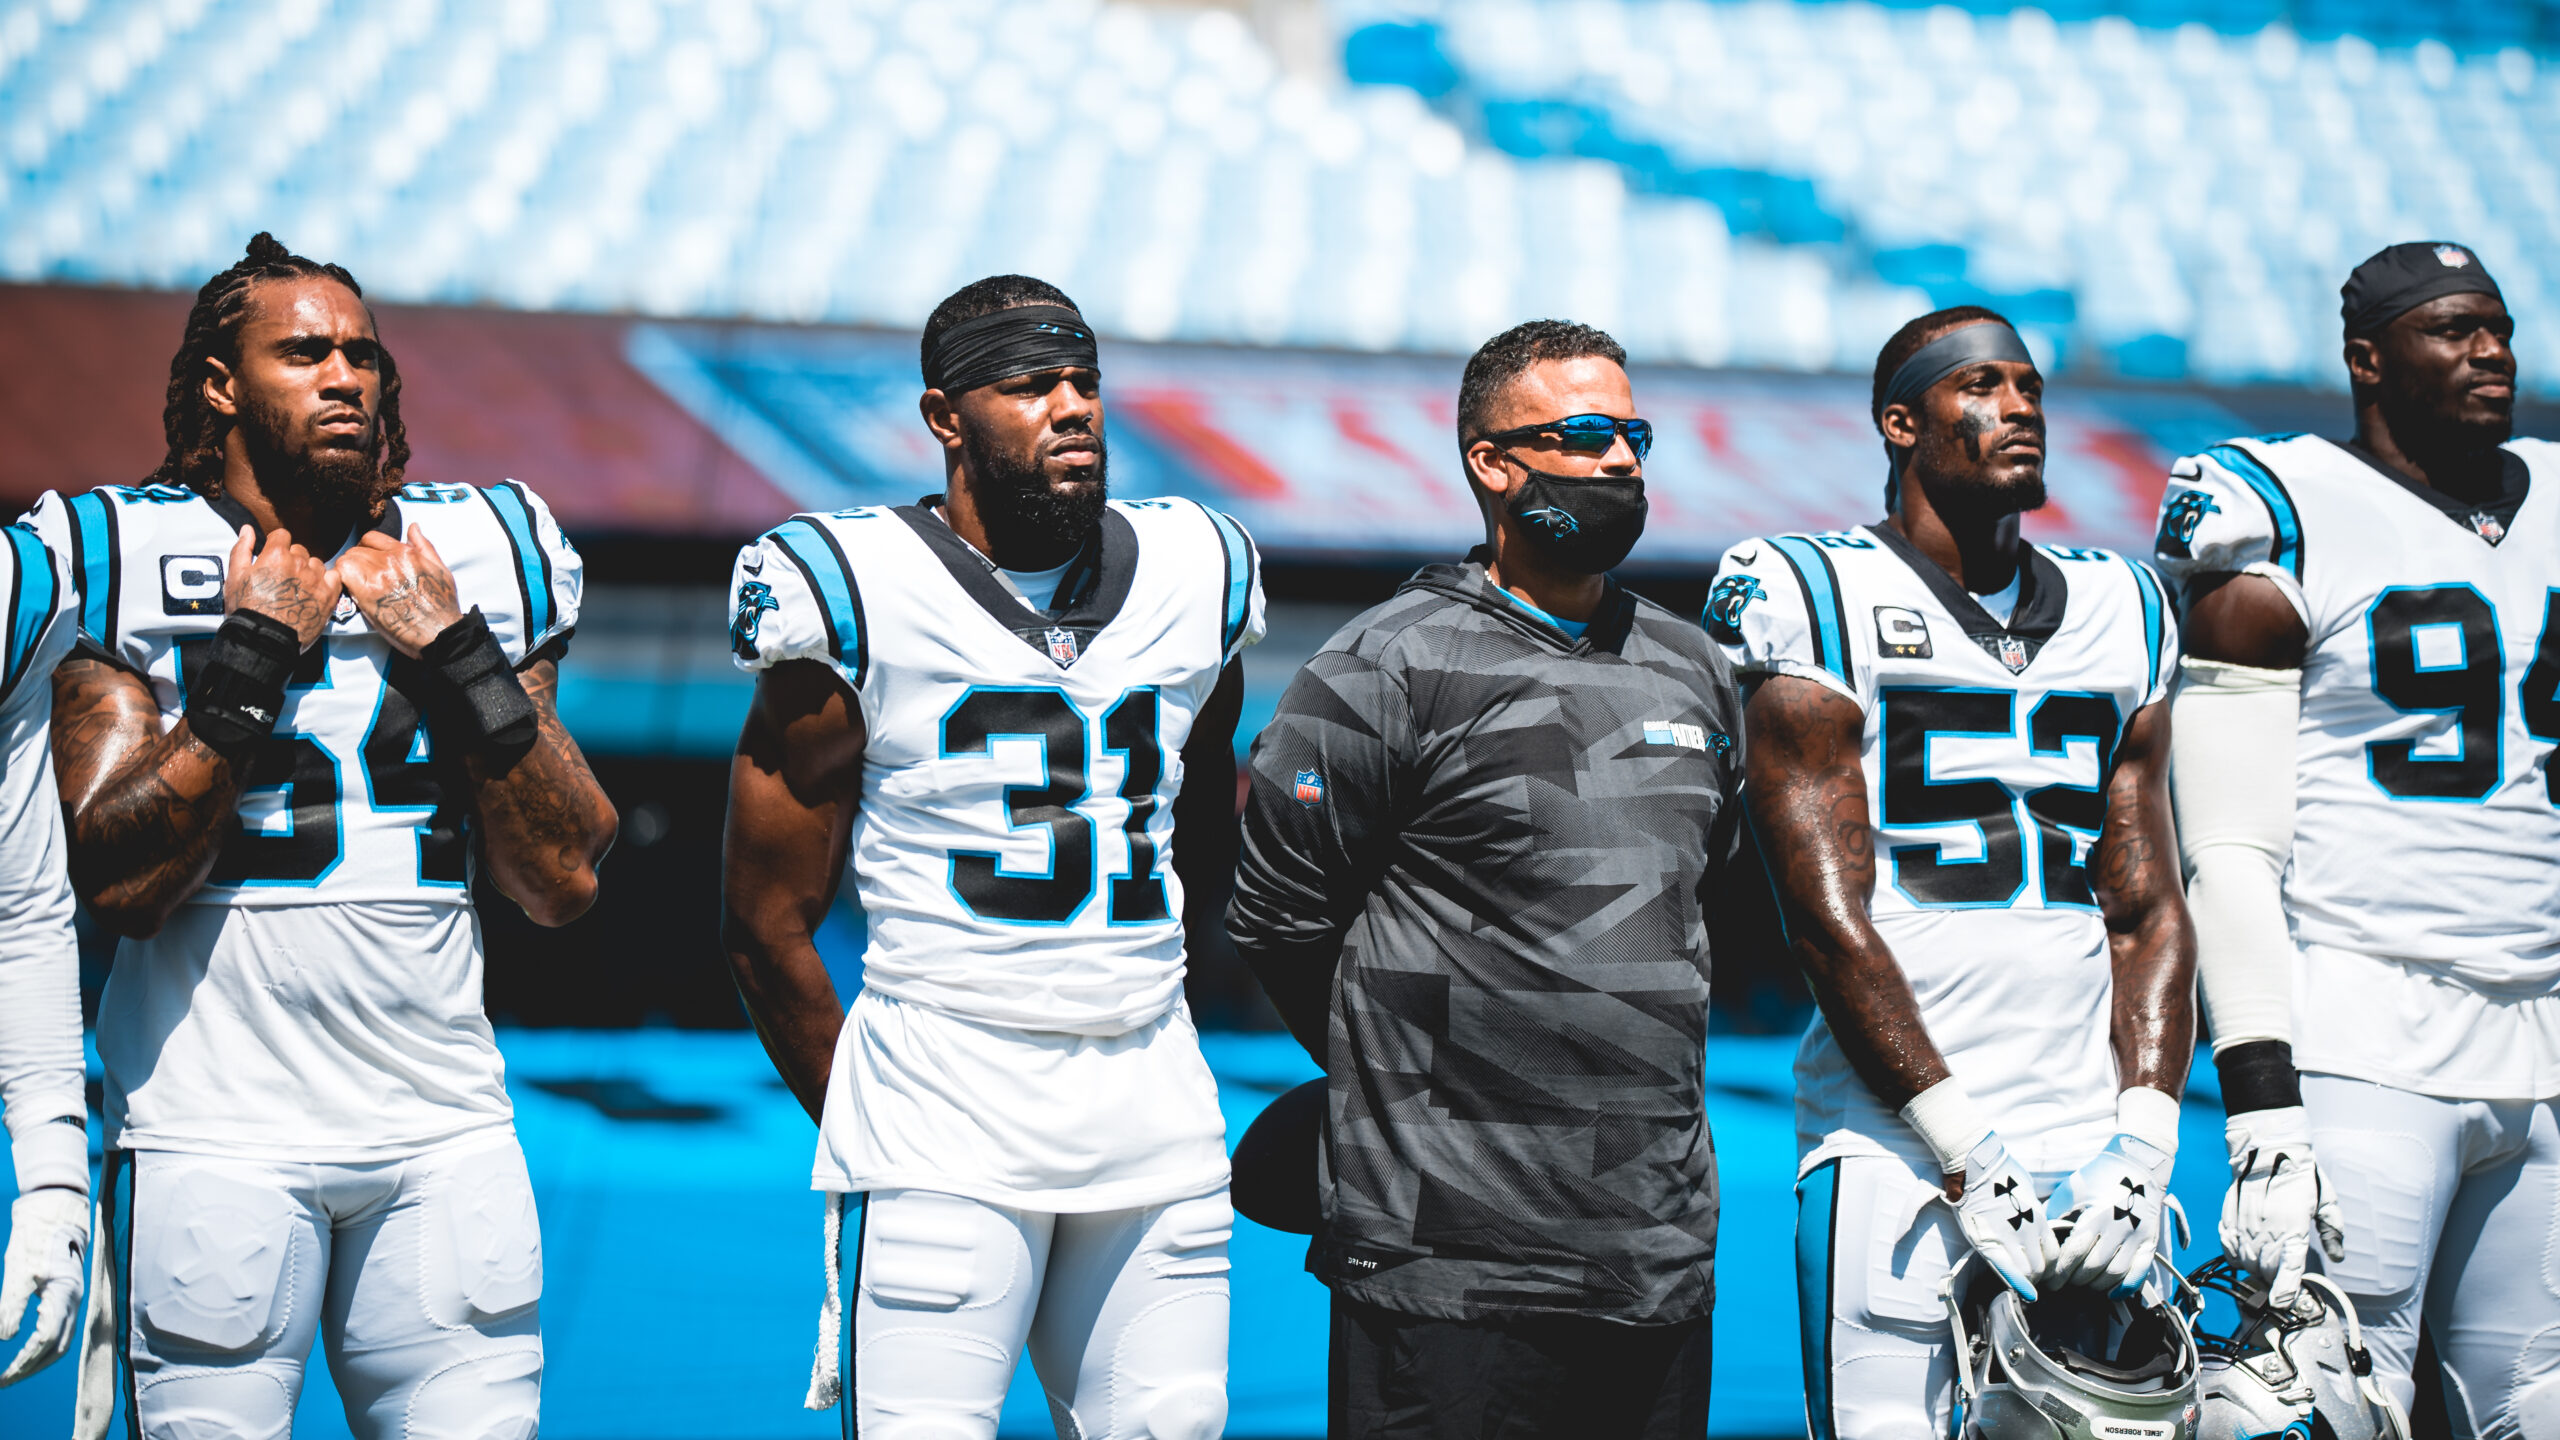 Panthers Run Game Coordinator Al Holcomb on the Senior Bowl, Jeremy Chinn, Brian Burns & More